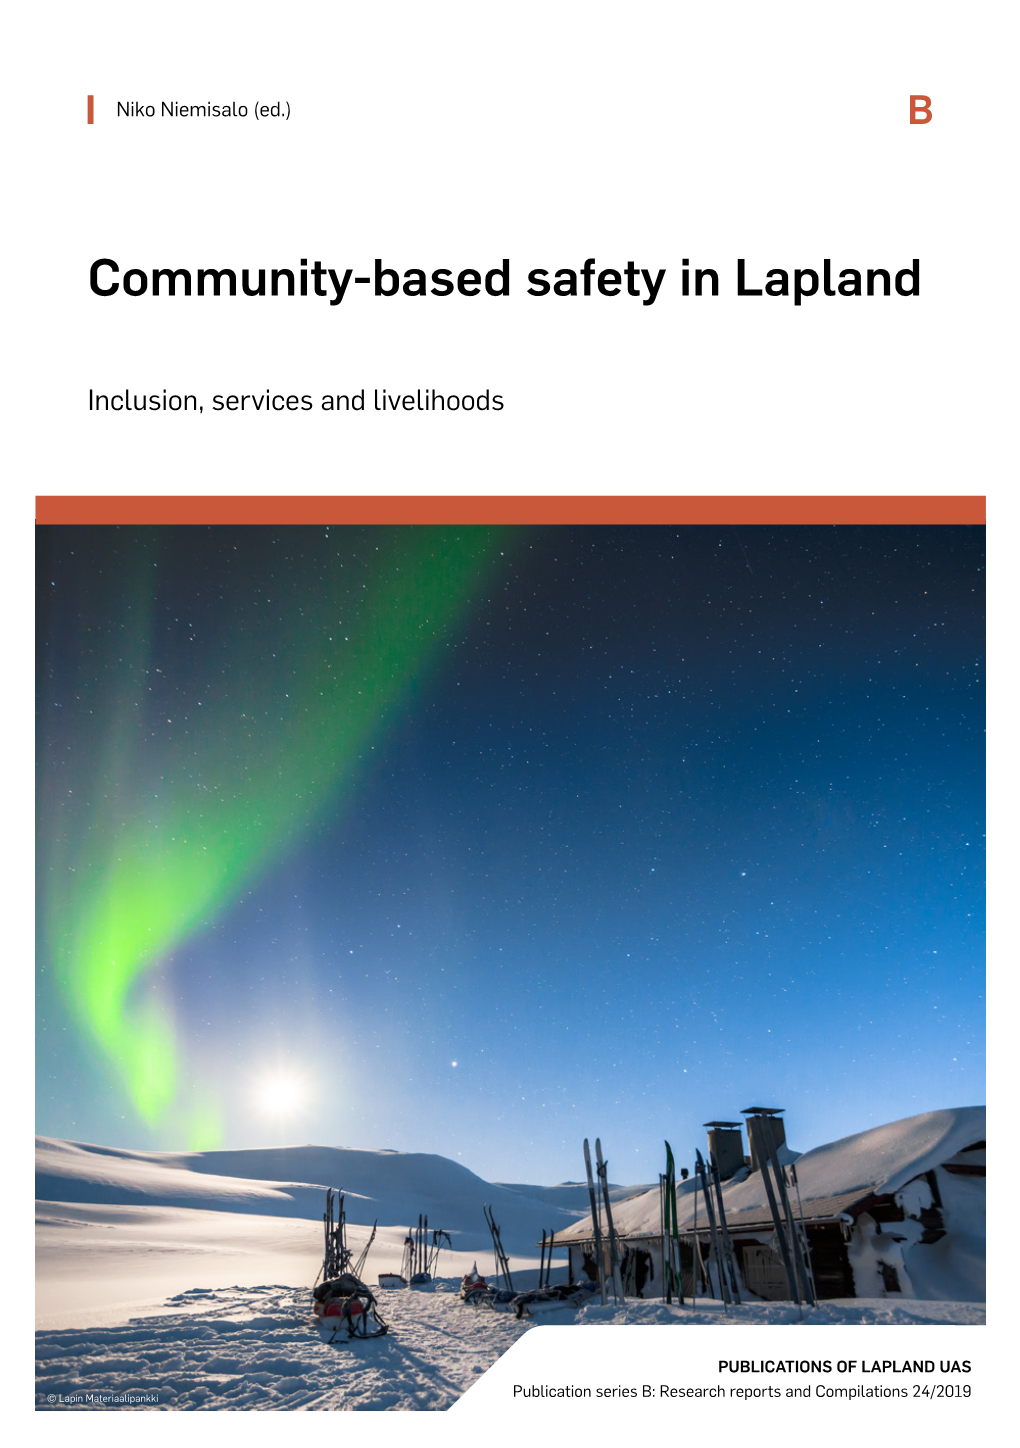 Community-Based Safety in Lapland